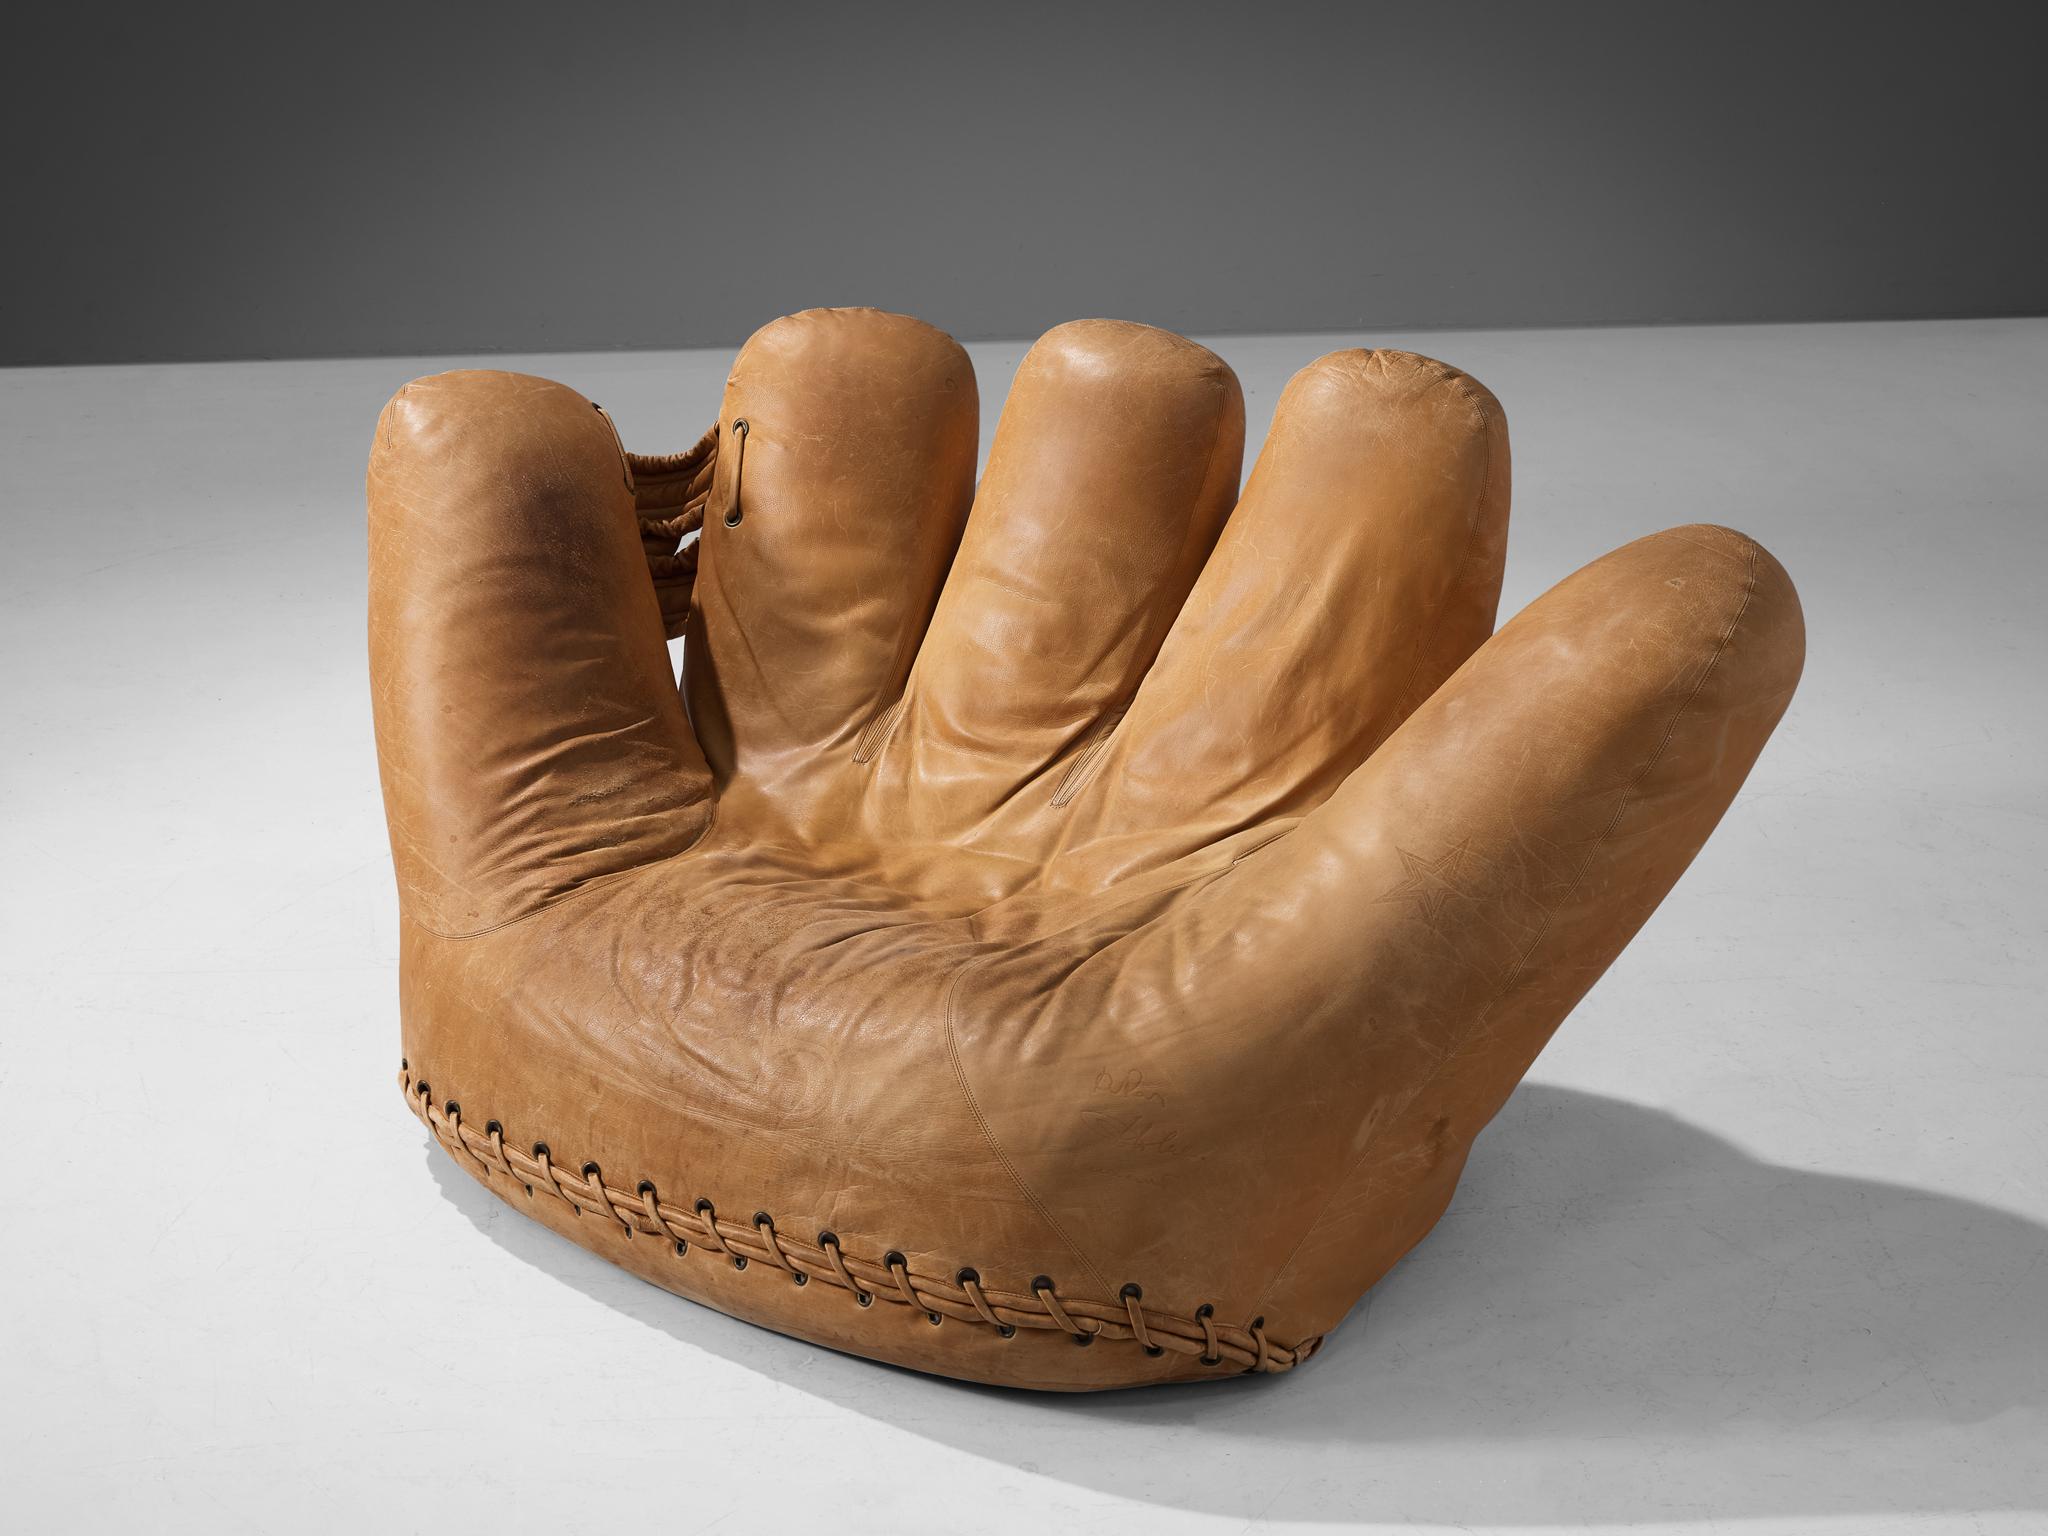 Gionathan de Pas & Donato D'Urbino and Paolo Lomazzi for Poltronova, glove chair, cognac leather, 1970s, Italy.

This extraordinary chair is named the 'Joe Seat' and was dedicated to the legendary baseball champion Joe DiMaggio. The giant 'Joe